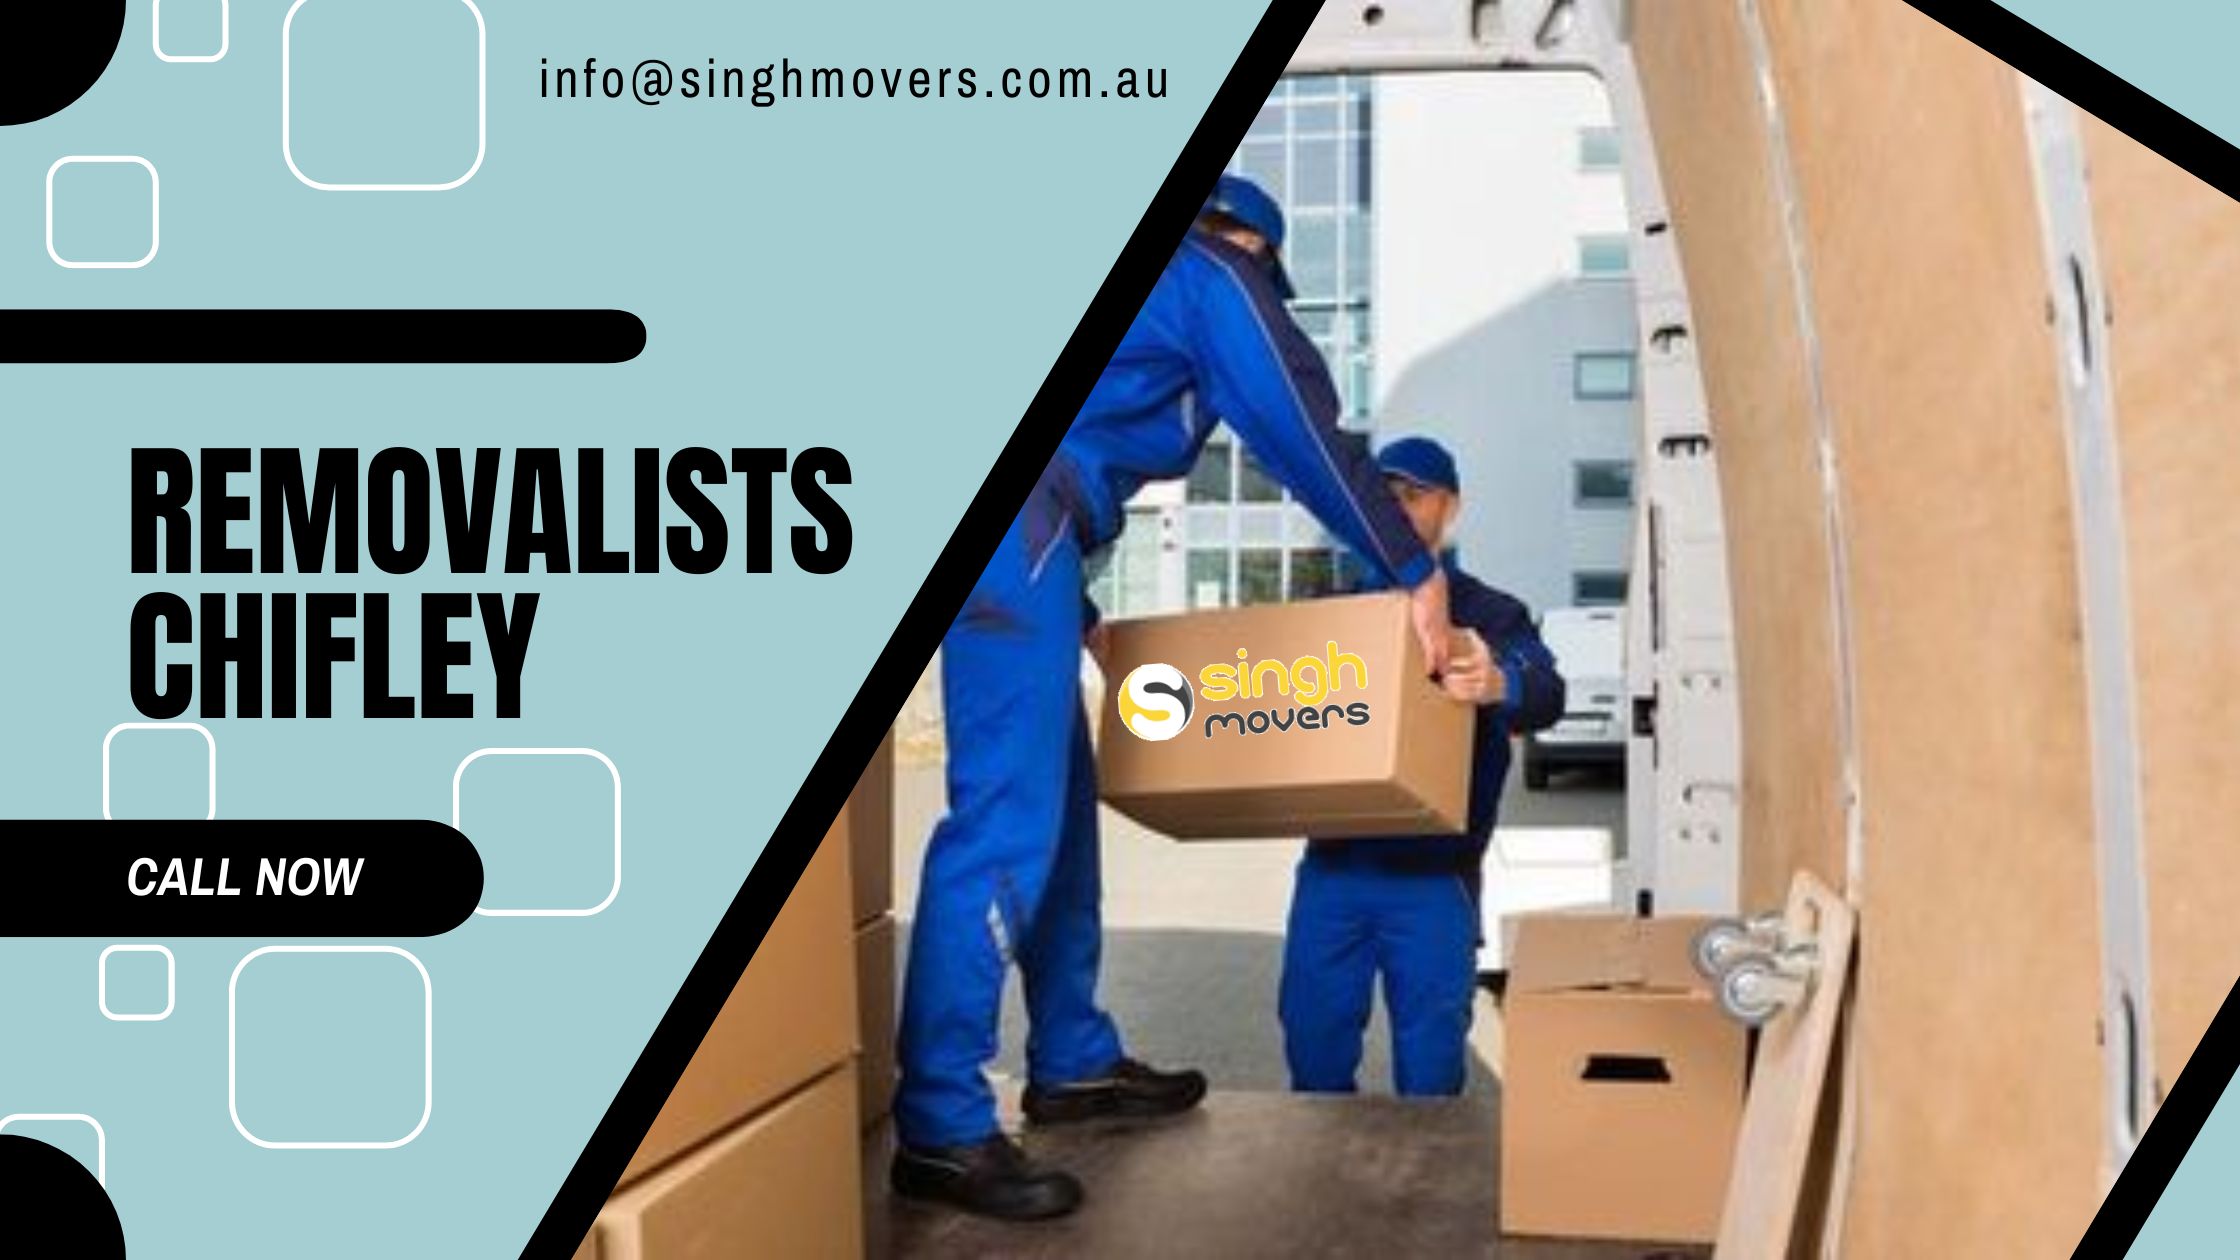 Removalists Chifley